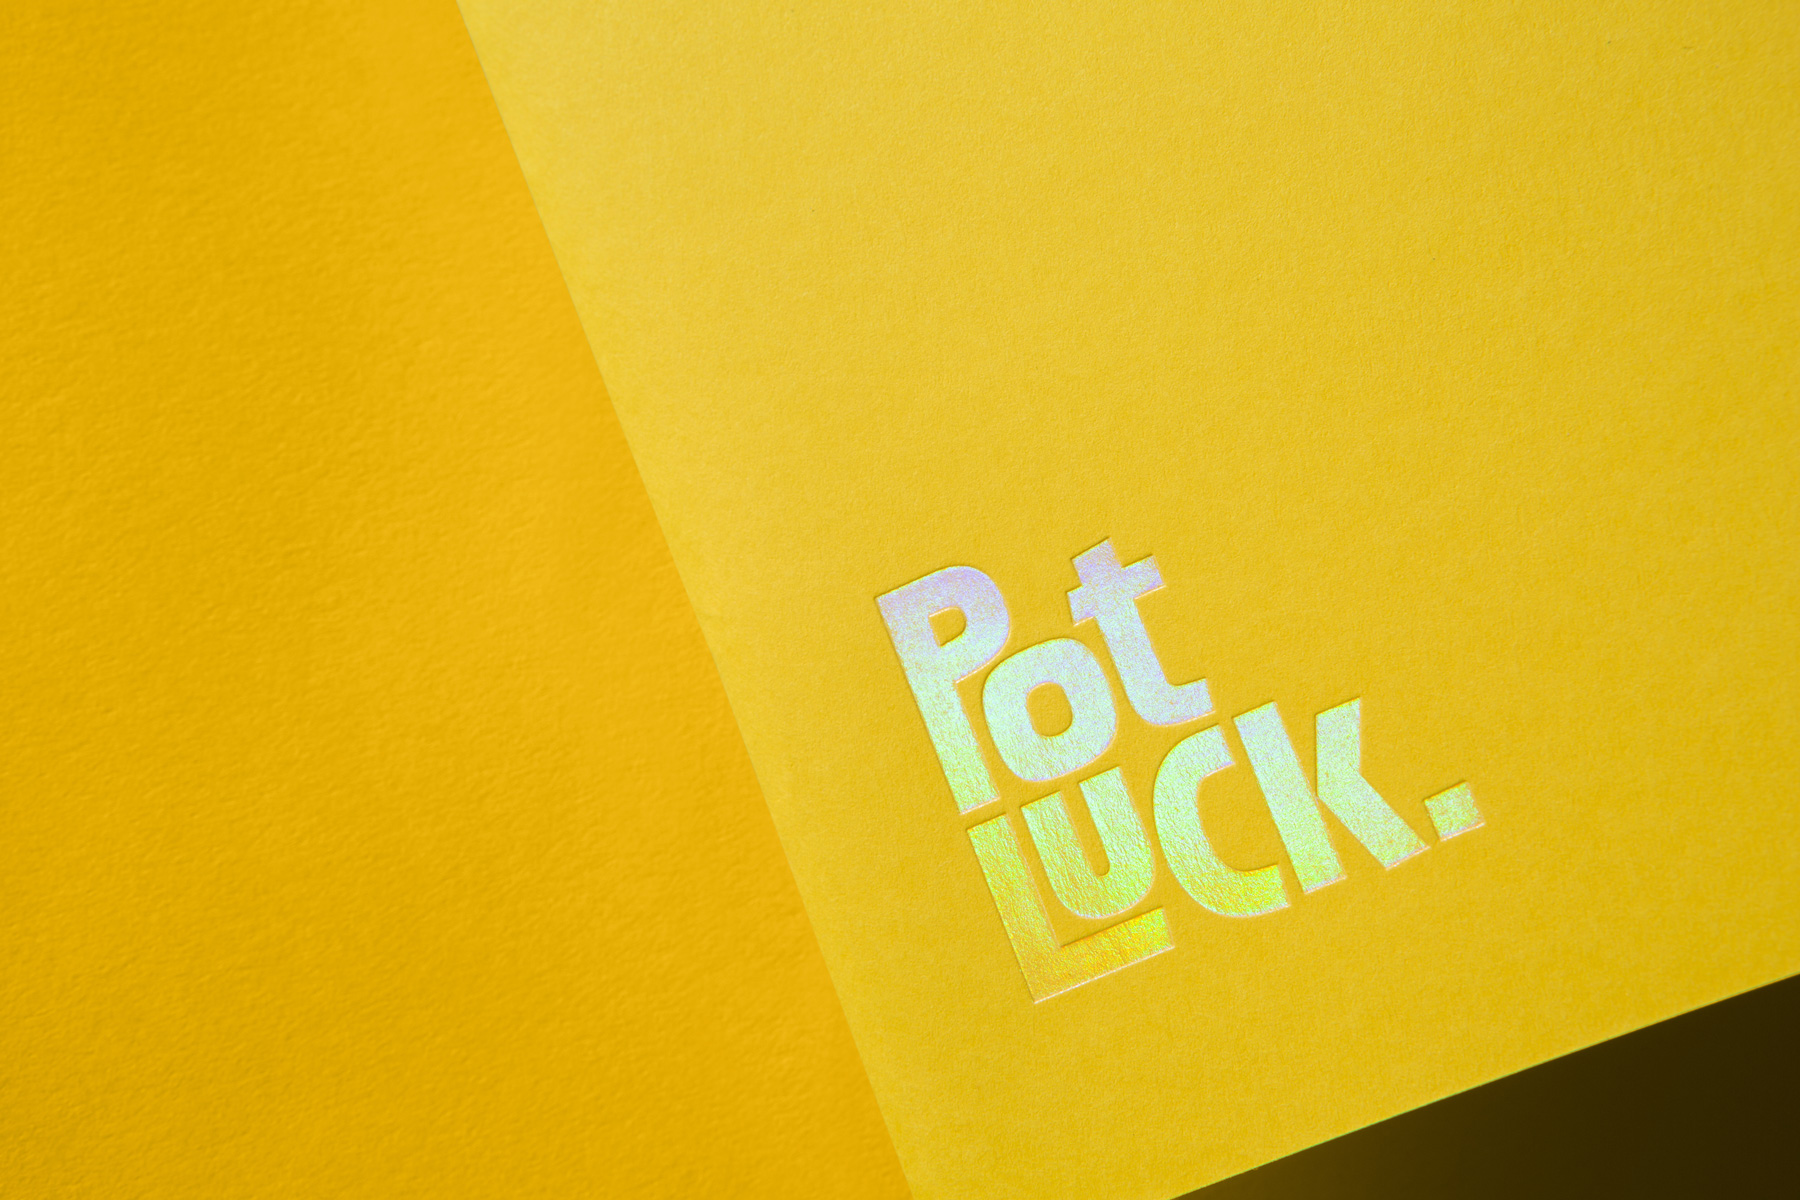 Potluck charity exhibition cookbook with holographic foil for Free to Feed